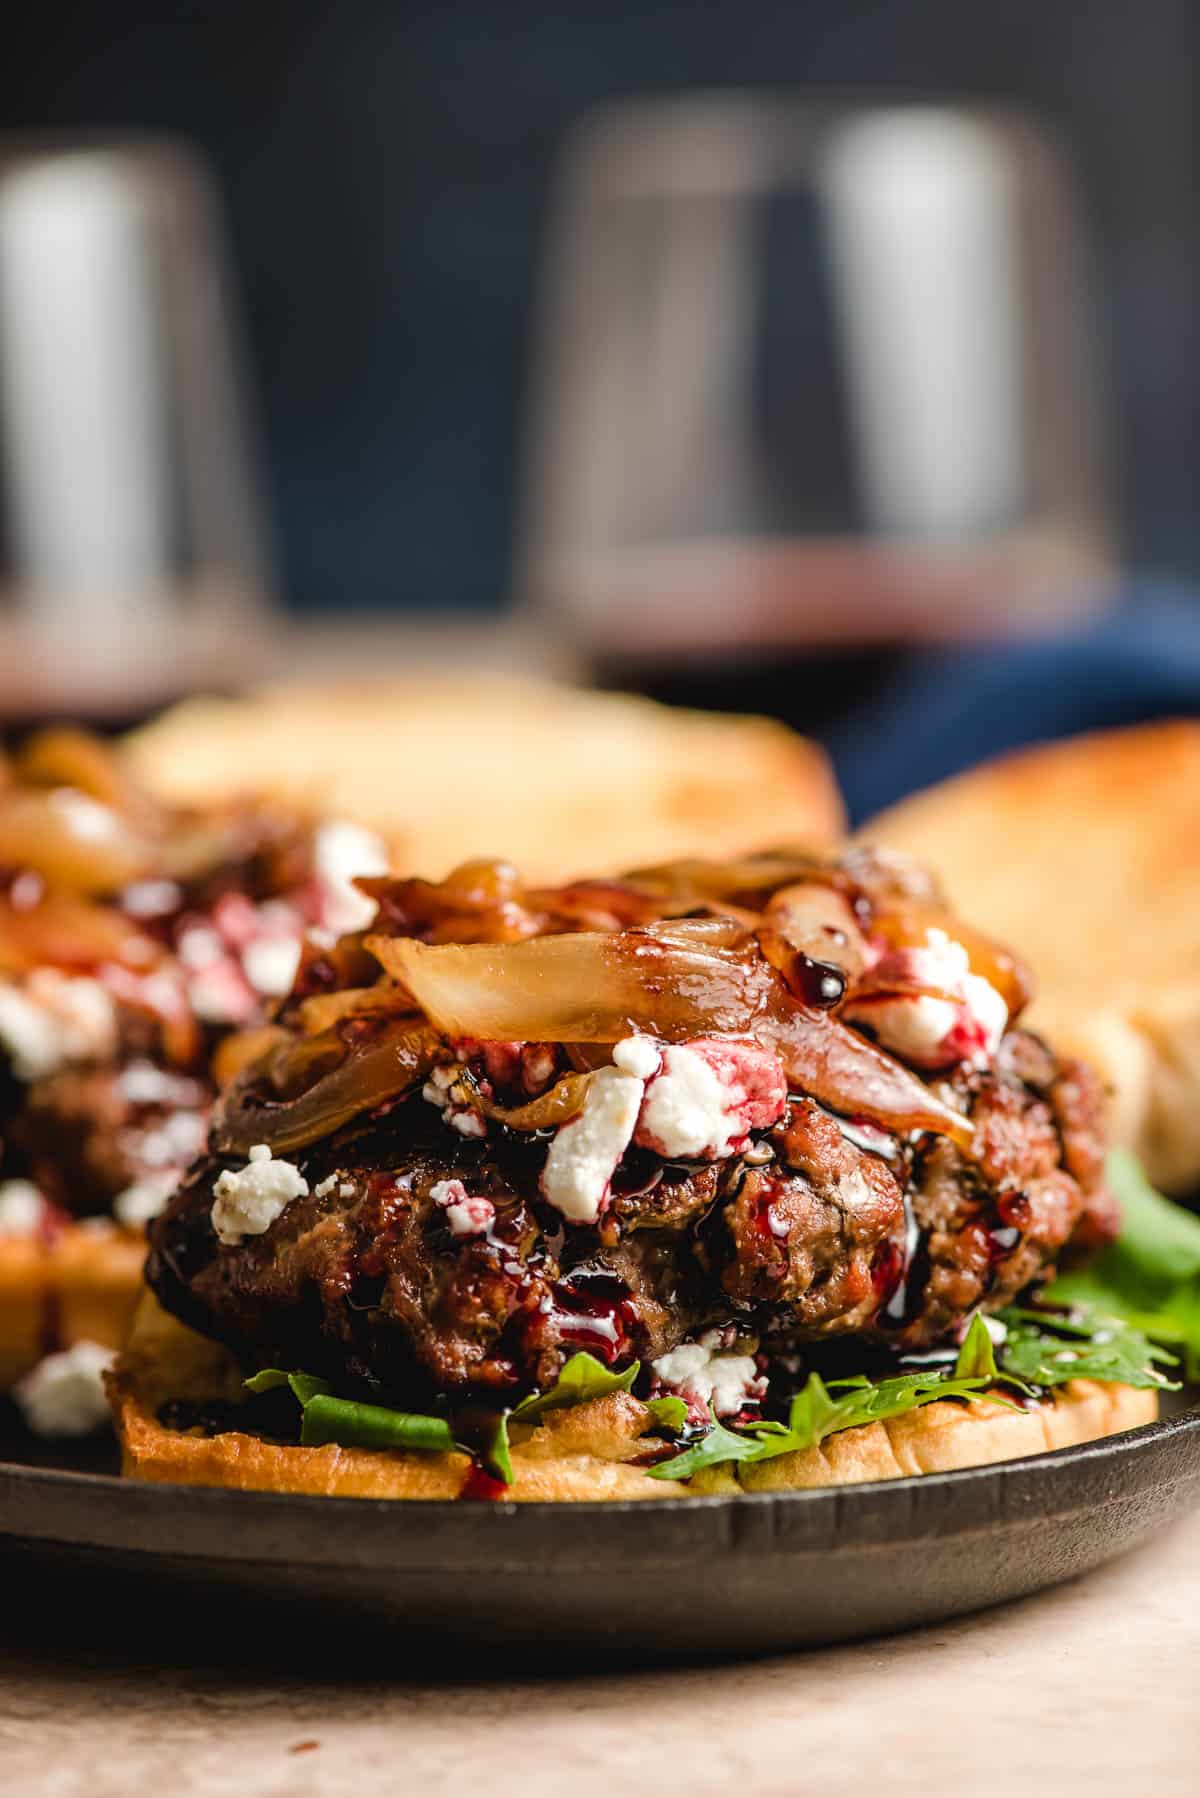 Open face burger topped with goat cheese, caramelized onions, and red wine sauce.